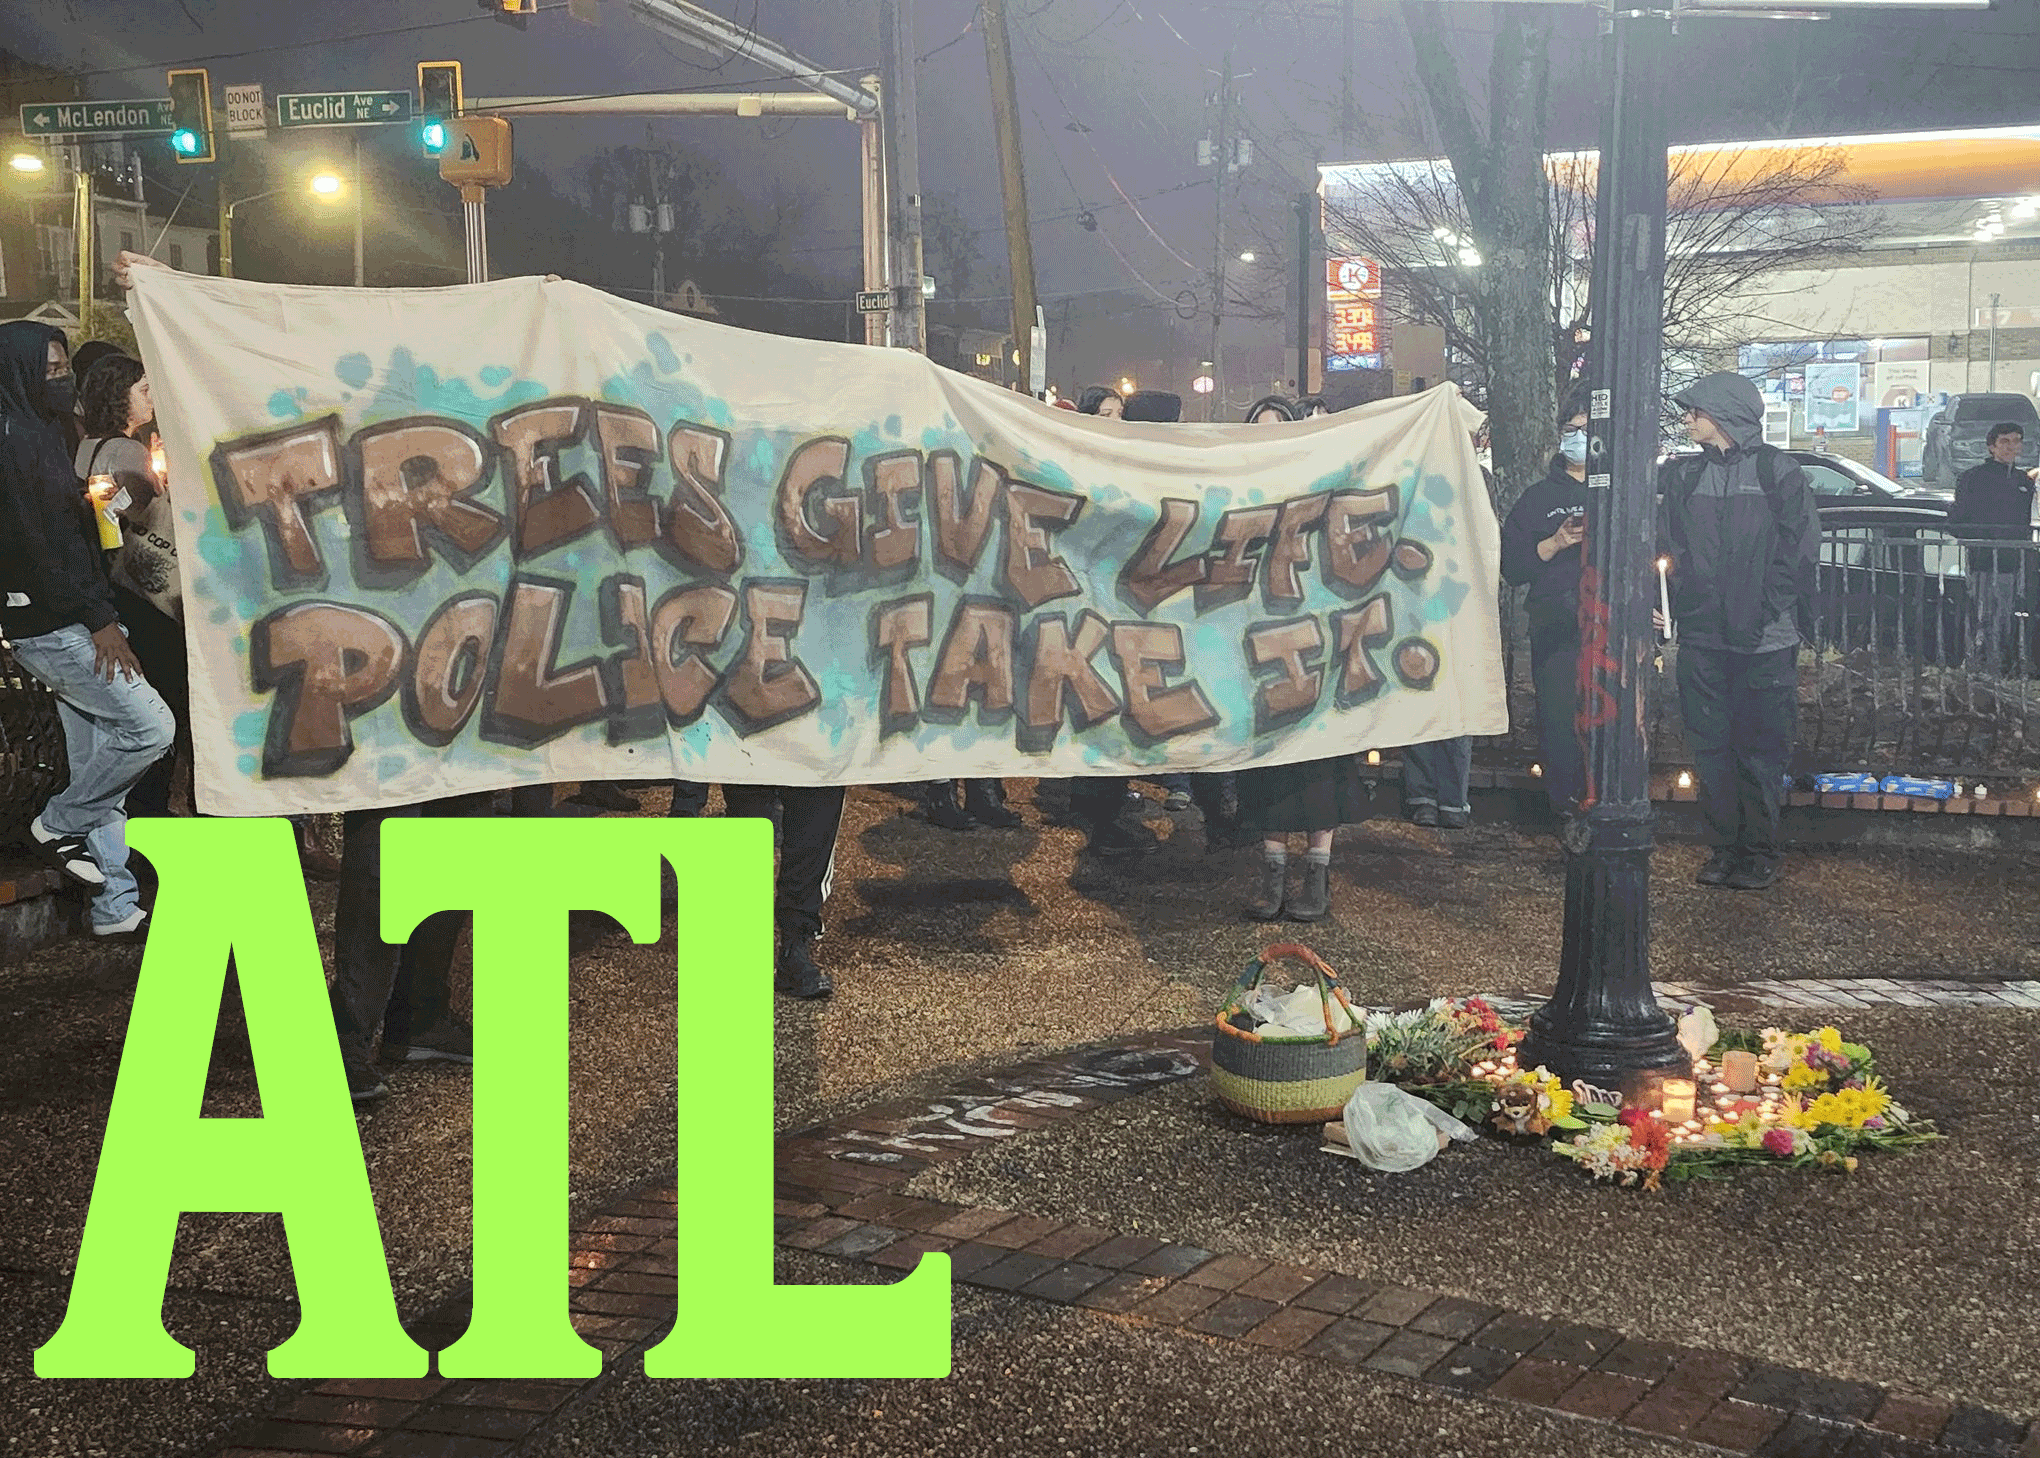 A banner that states "TREES GIVE LIFE POLICE TAKE IT." In purple letters with blue backsplash is held by several vigilers. On the left is a light pole surrounded with flowers and candles. In the bottom left corners, "ATL" is spelled in green letters.